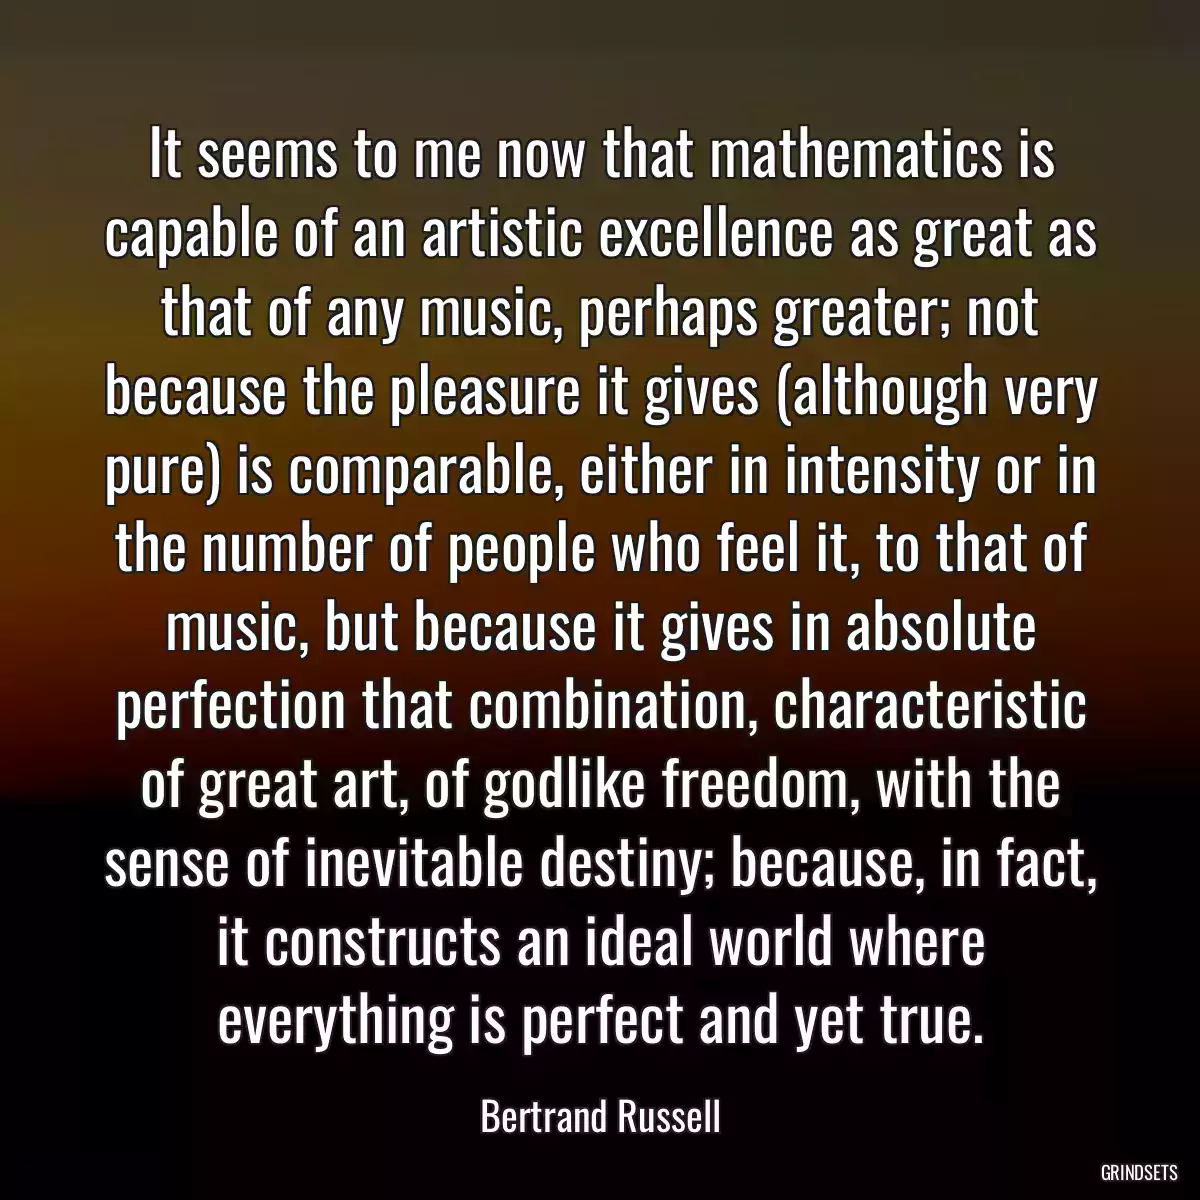 It seems to me now that mathematics is capable of an artistic excellence as great as that of any music, perhaps greater; not because the pleasure it gives (although very pure) is comparable, either in intensity or in the number of people who feel it, to that of music, but because it gives in absolute perfection that combination, characteristic of great art, of godlike freedom, with the sense of inevitable destiny; because, in fact, it constructs an ideal world where everything is perfect and yet true.